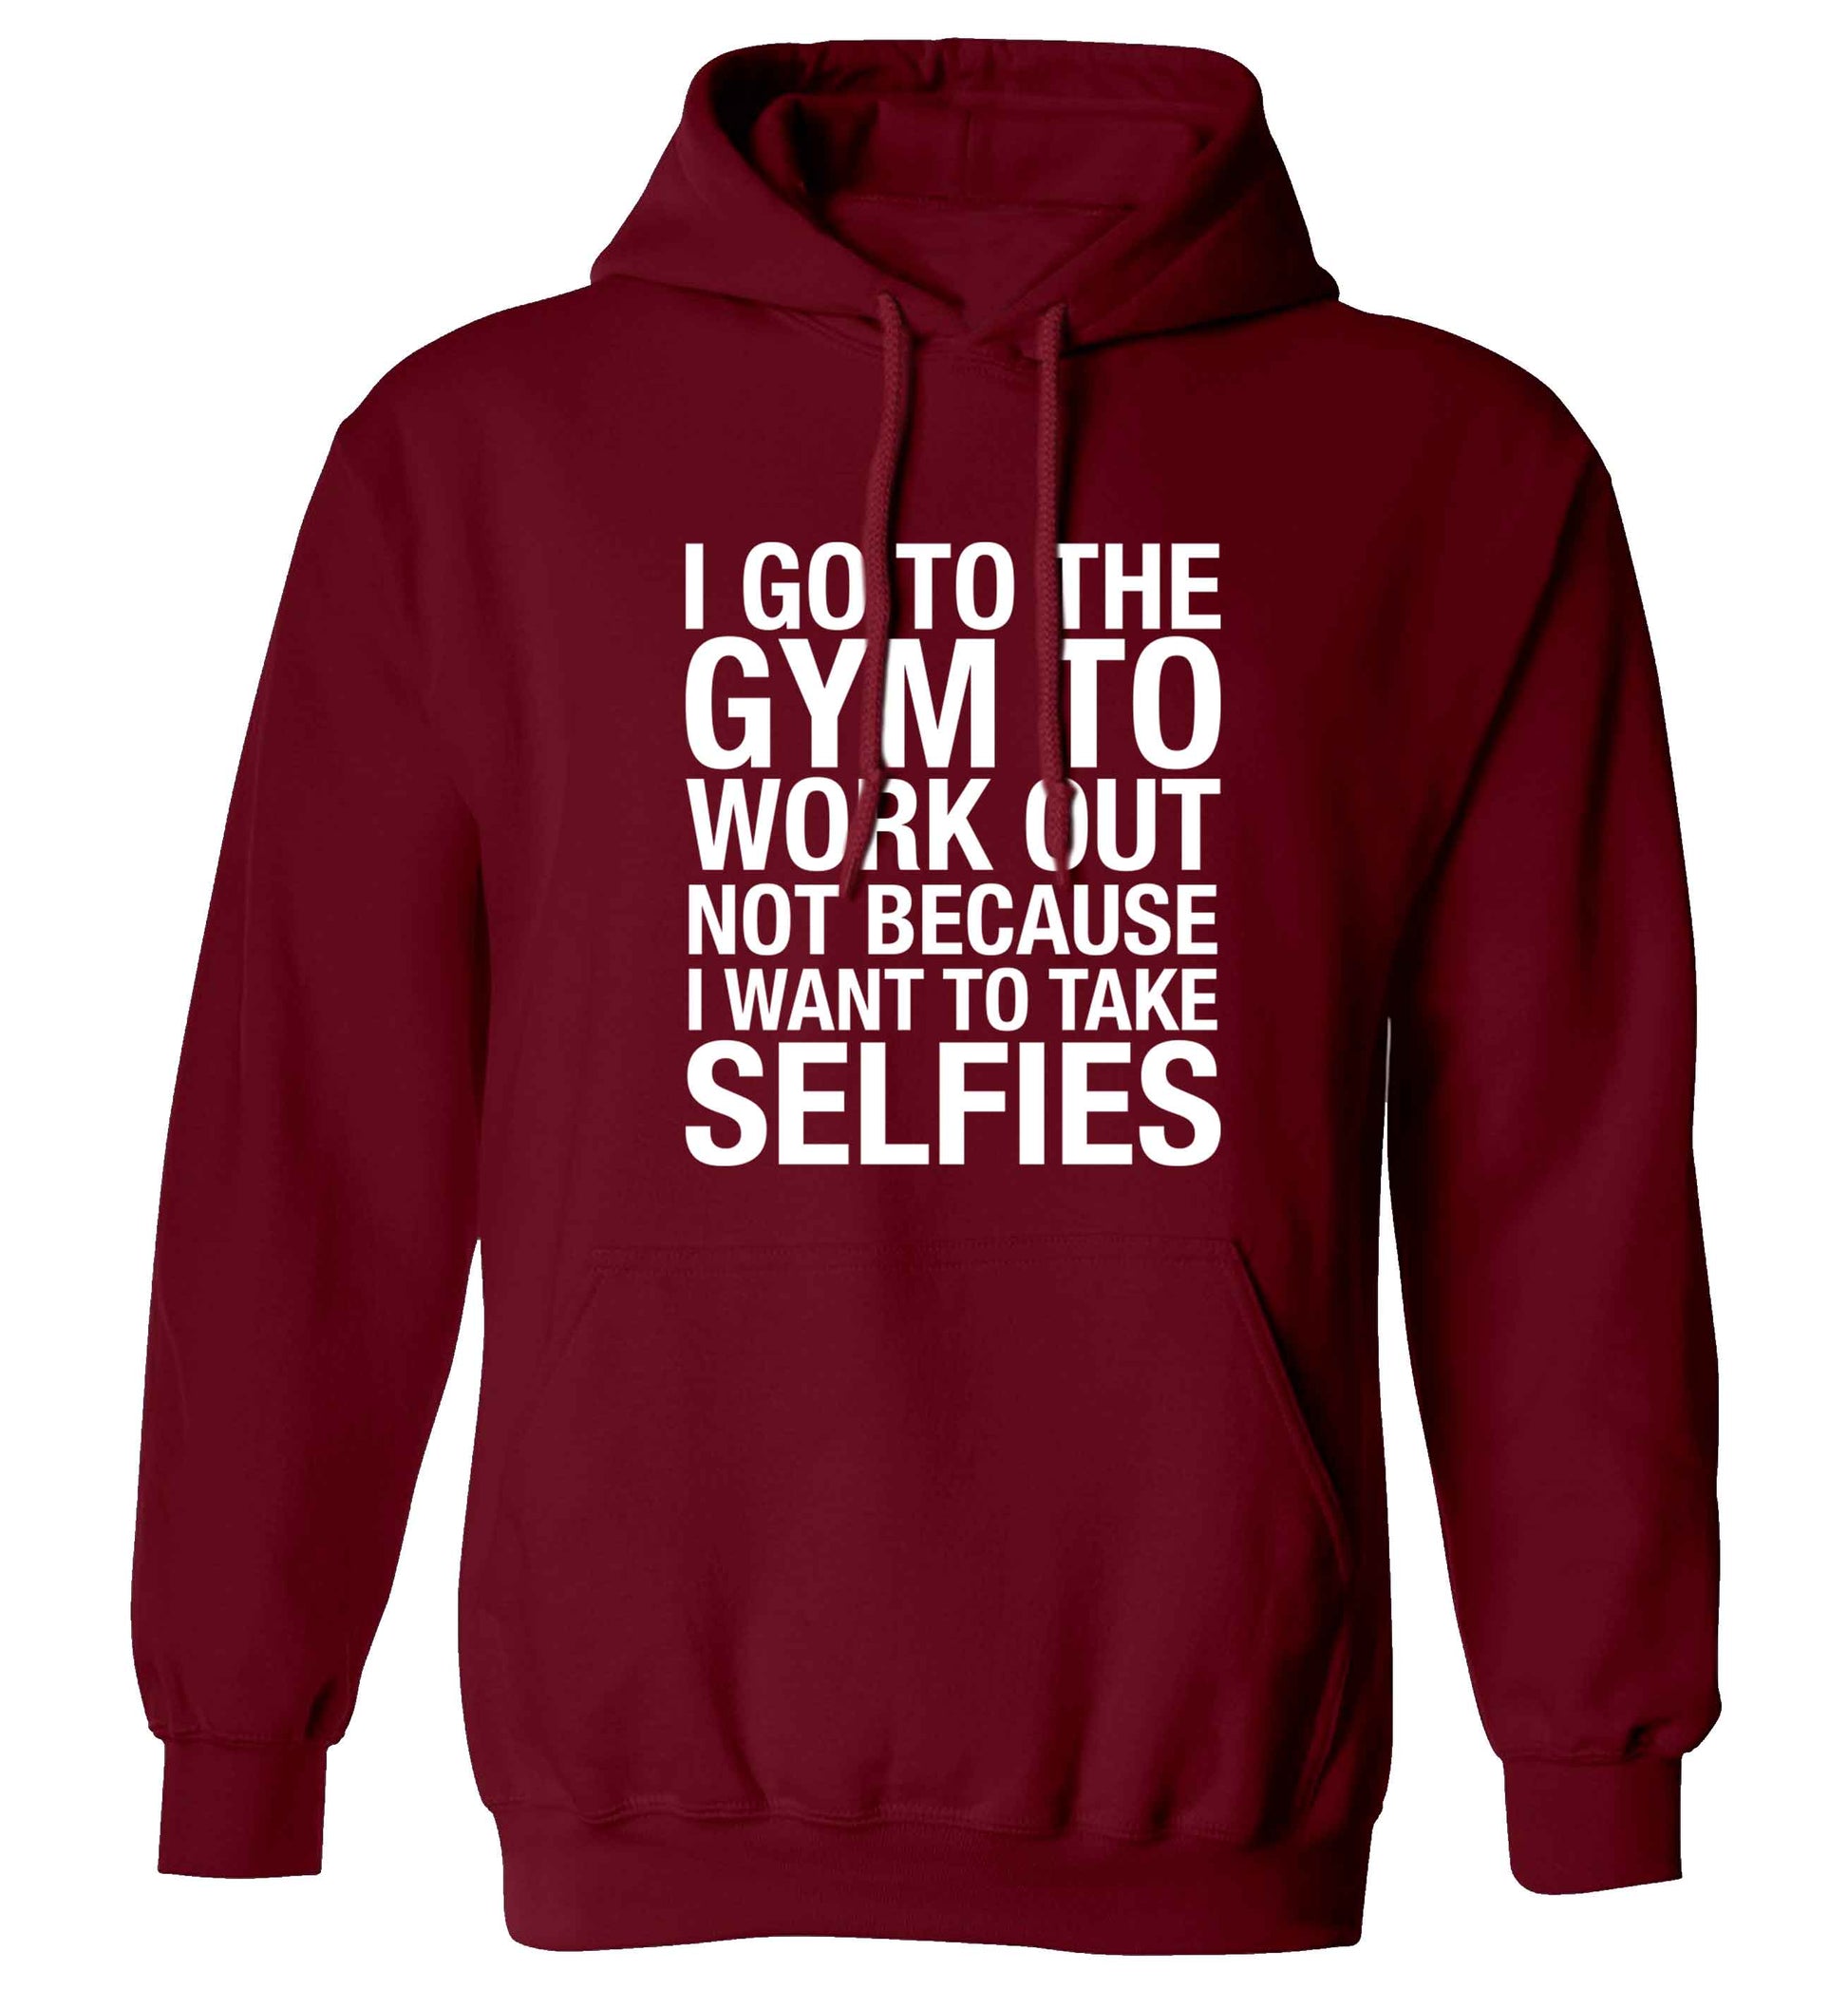 I go to the gym to workout not to take selfies adults unisex maroon hoodie 2XL